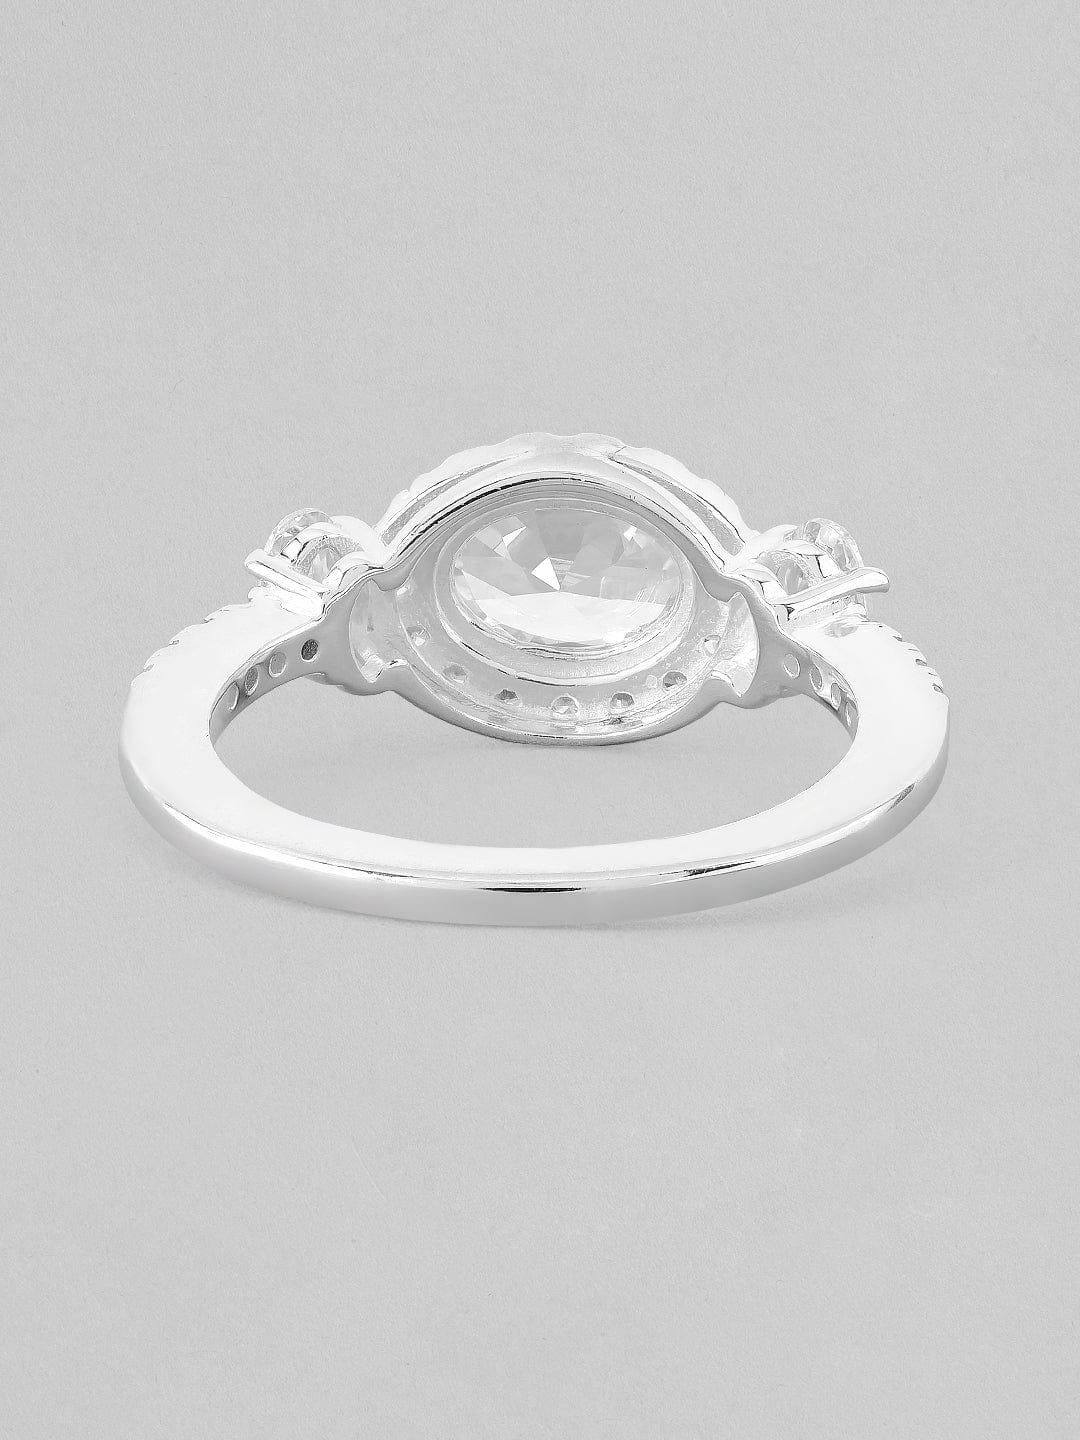 The Sparkling Zirconia Ring Rings